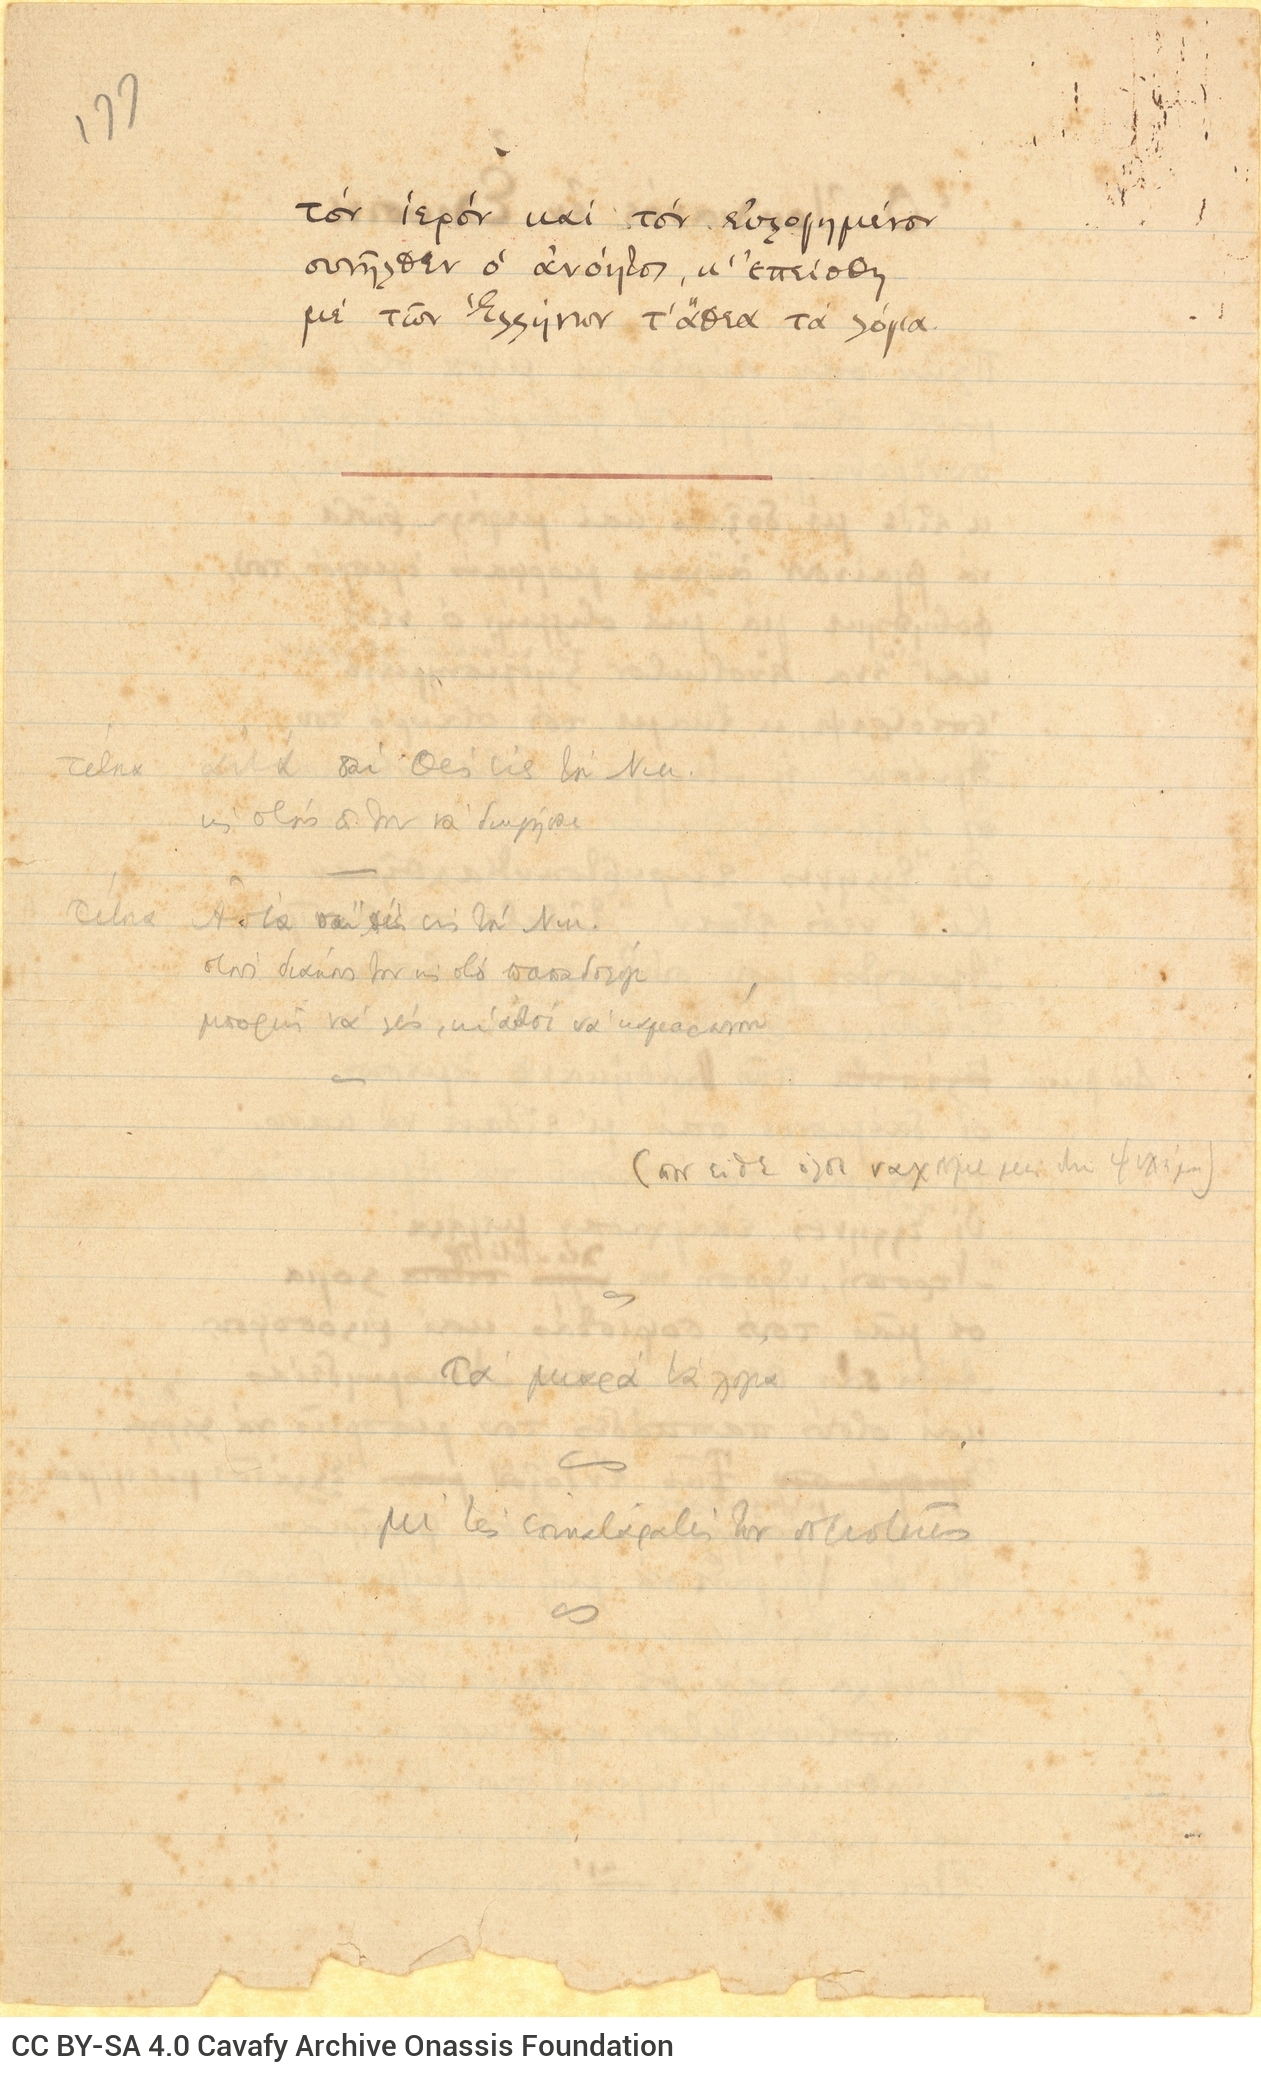 Manuscript of a poem with the original title "Julian in Eleusis" (emended in pencil to "Julian at the Mysteries"), written